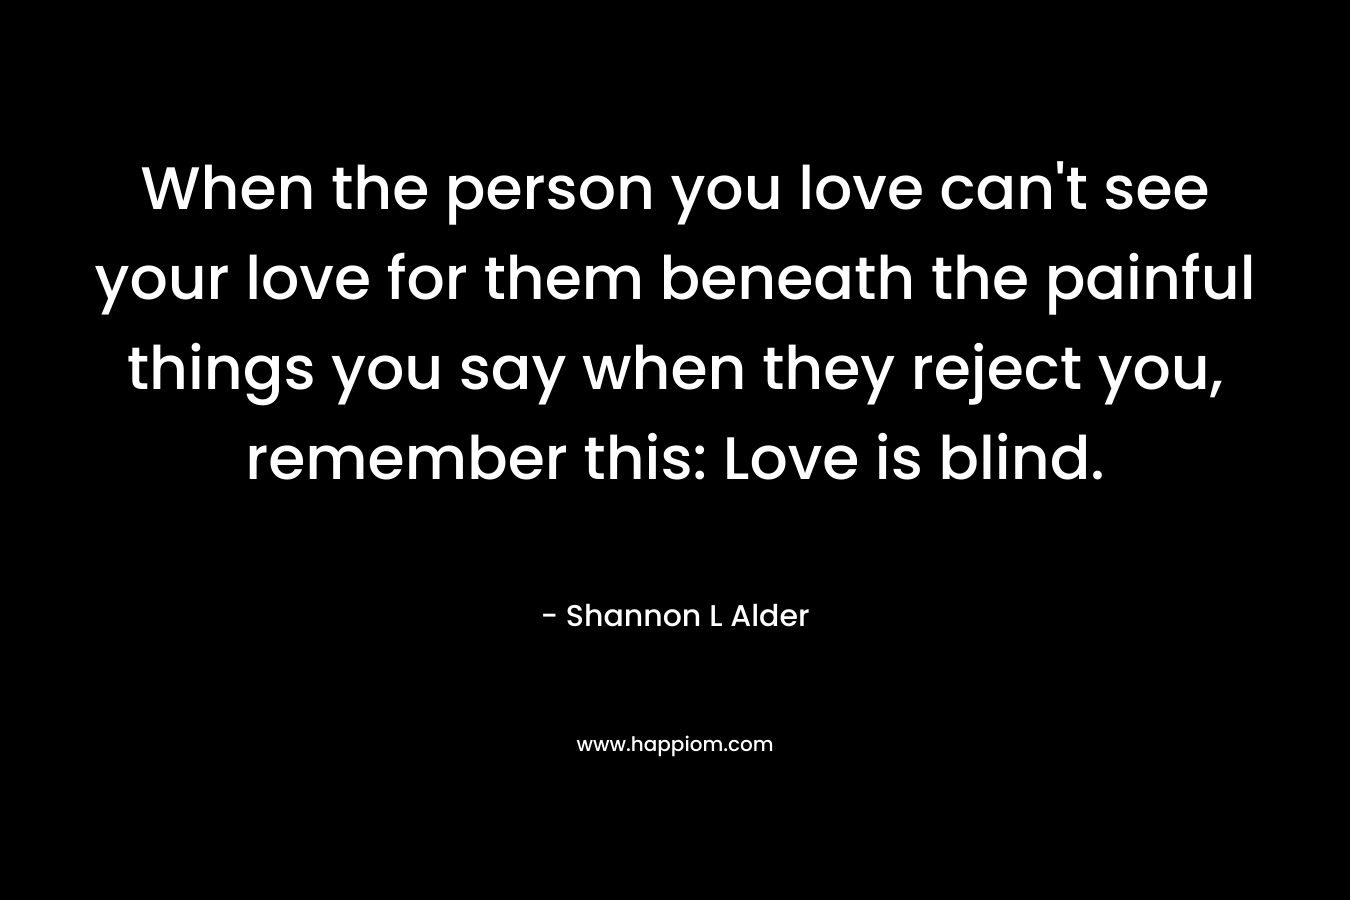 When the person you love can't see your love for them beneath the painful things you say when they reject you, remember this: Love is blind.